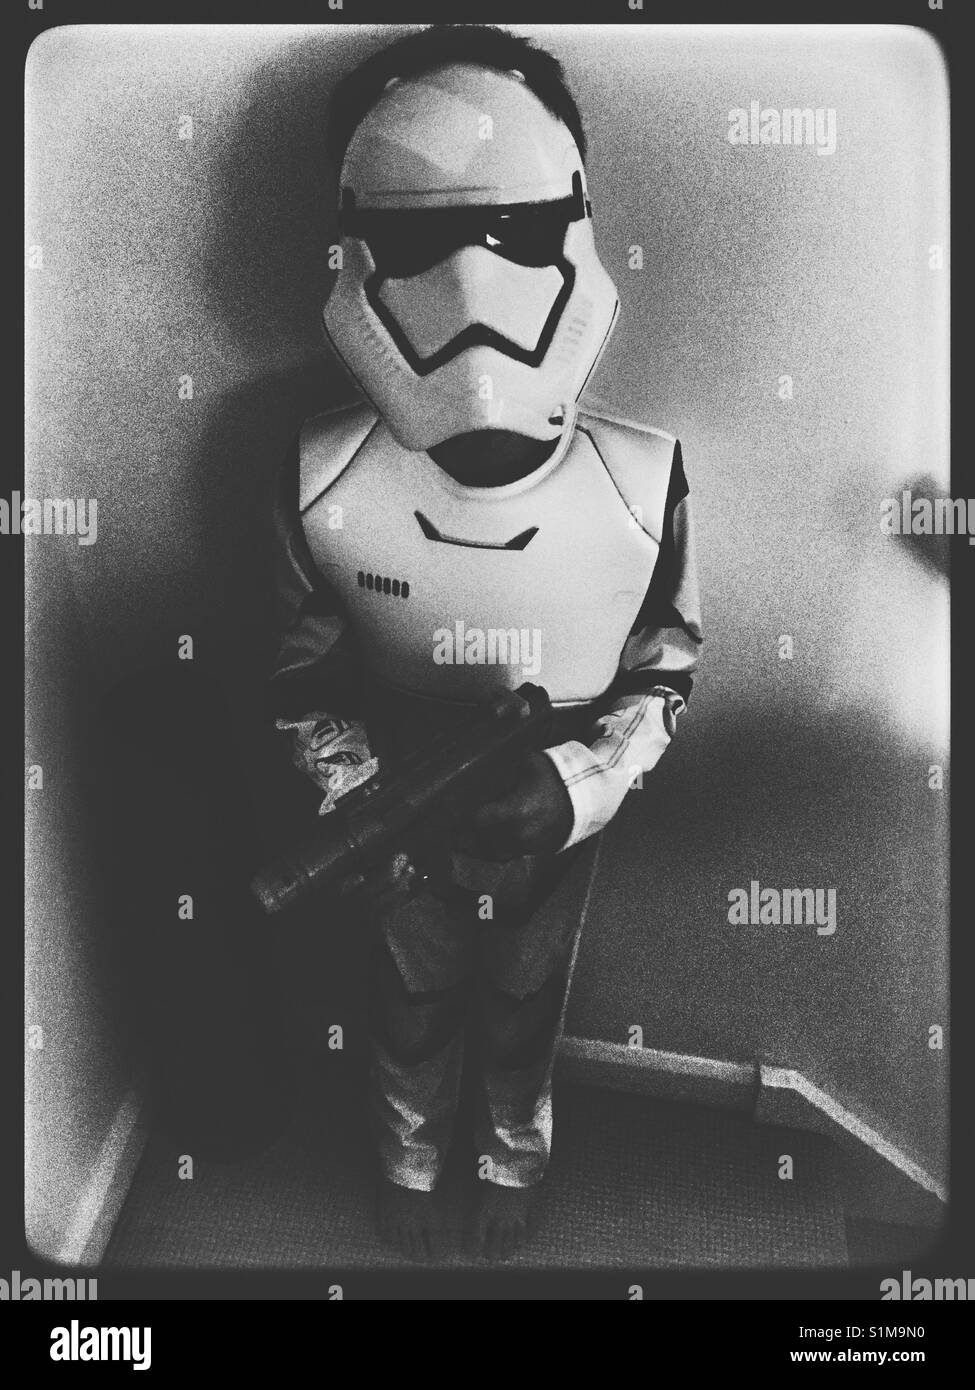 Boy wearing a Star Wars First Order Stormtrooper costume. Stock Photo